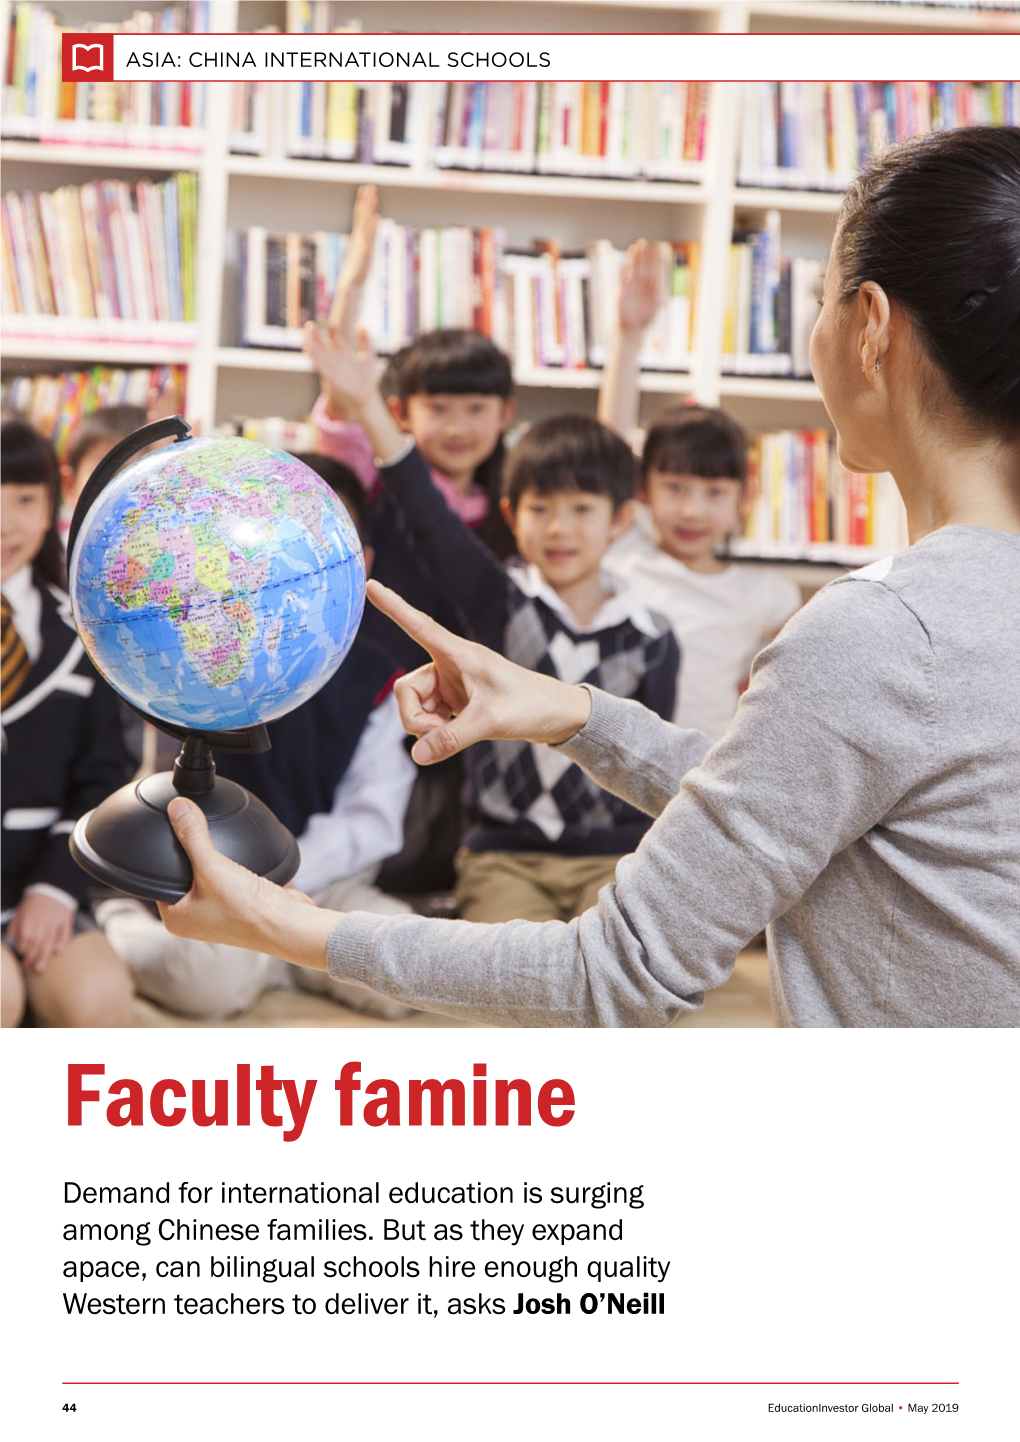 Faculty Famine Demand for International Education Is Surging Among Chinese Families